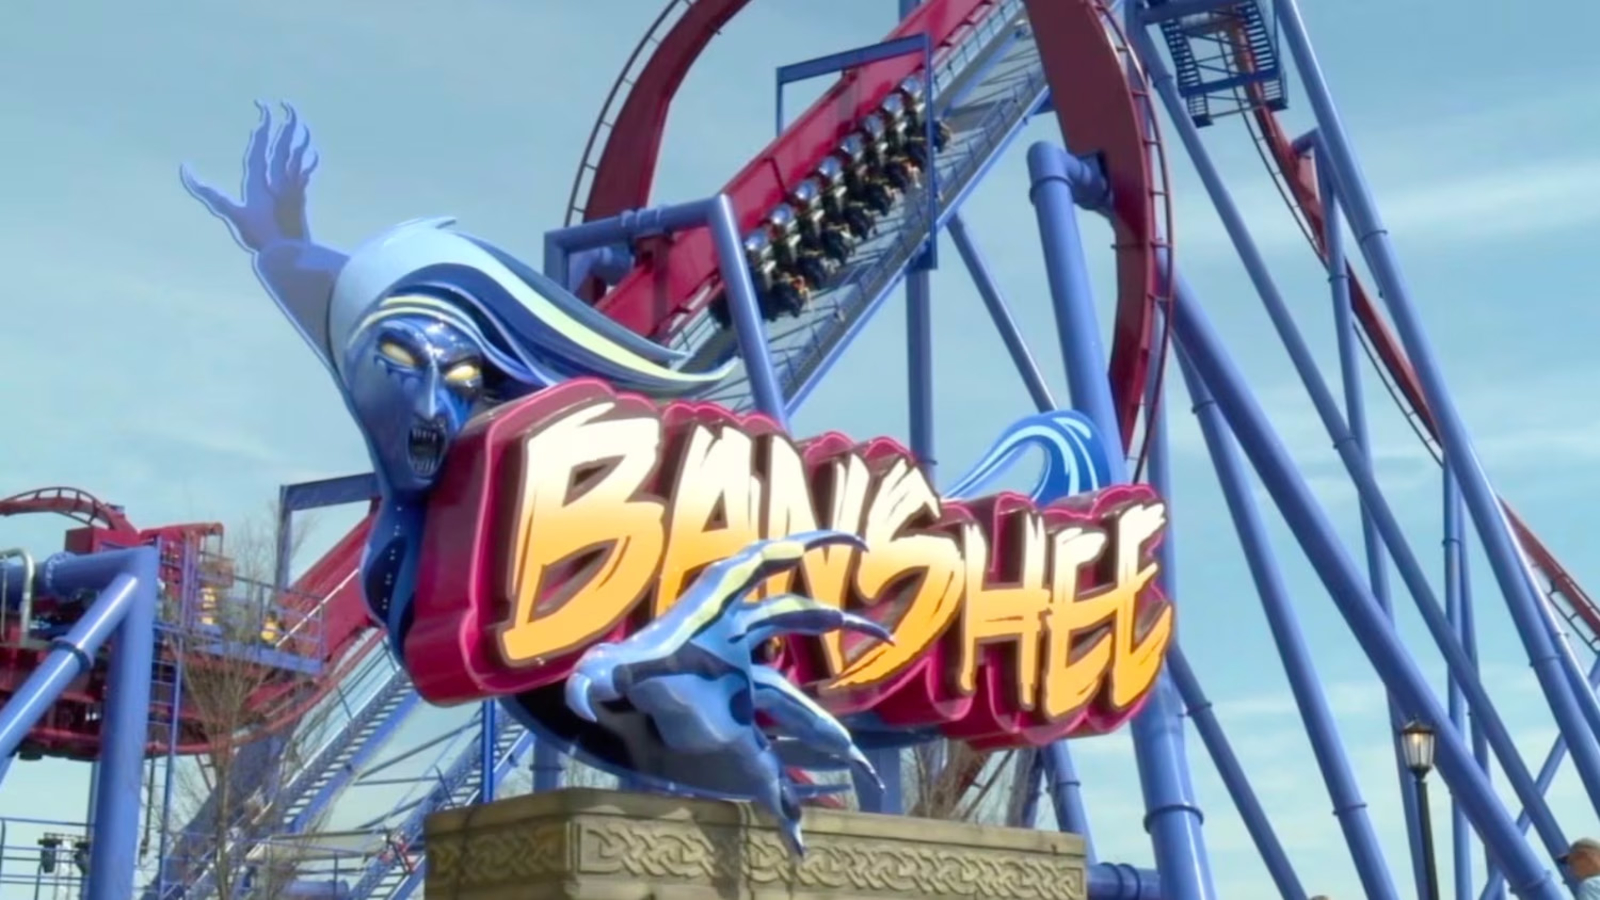 Man dies after being struck by roller coaster at Ohio amusement park